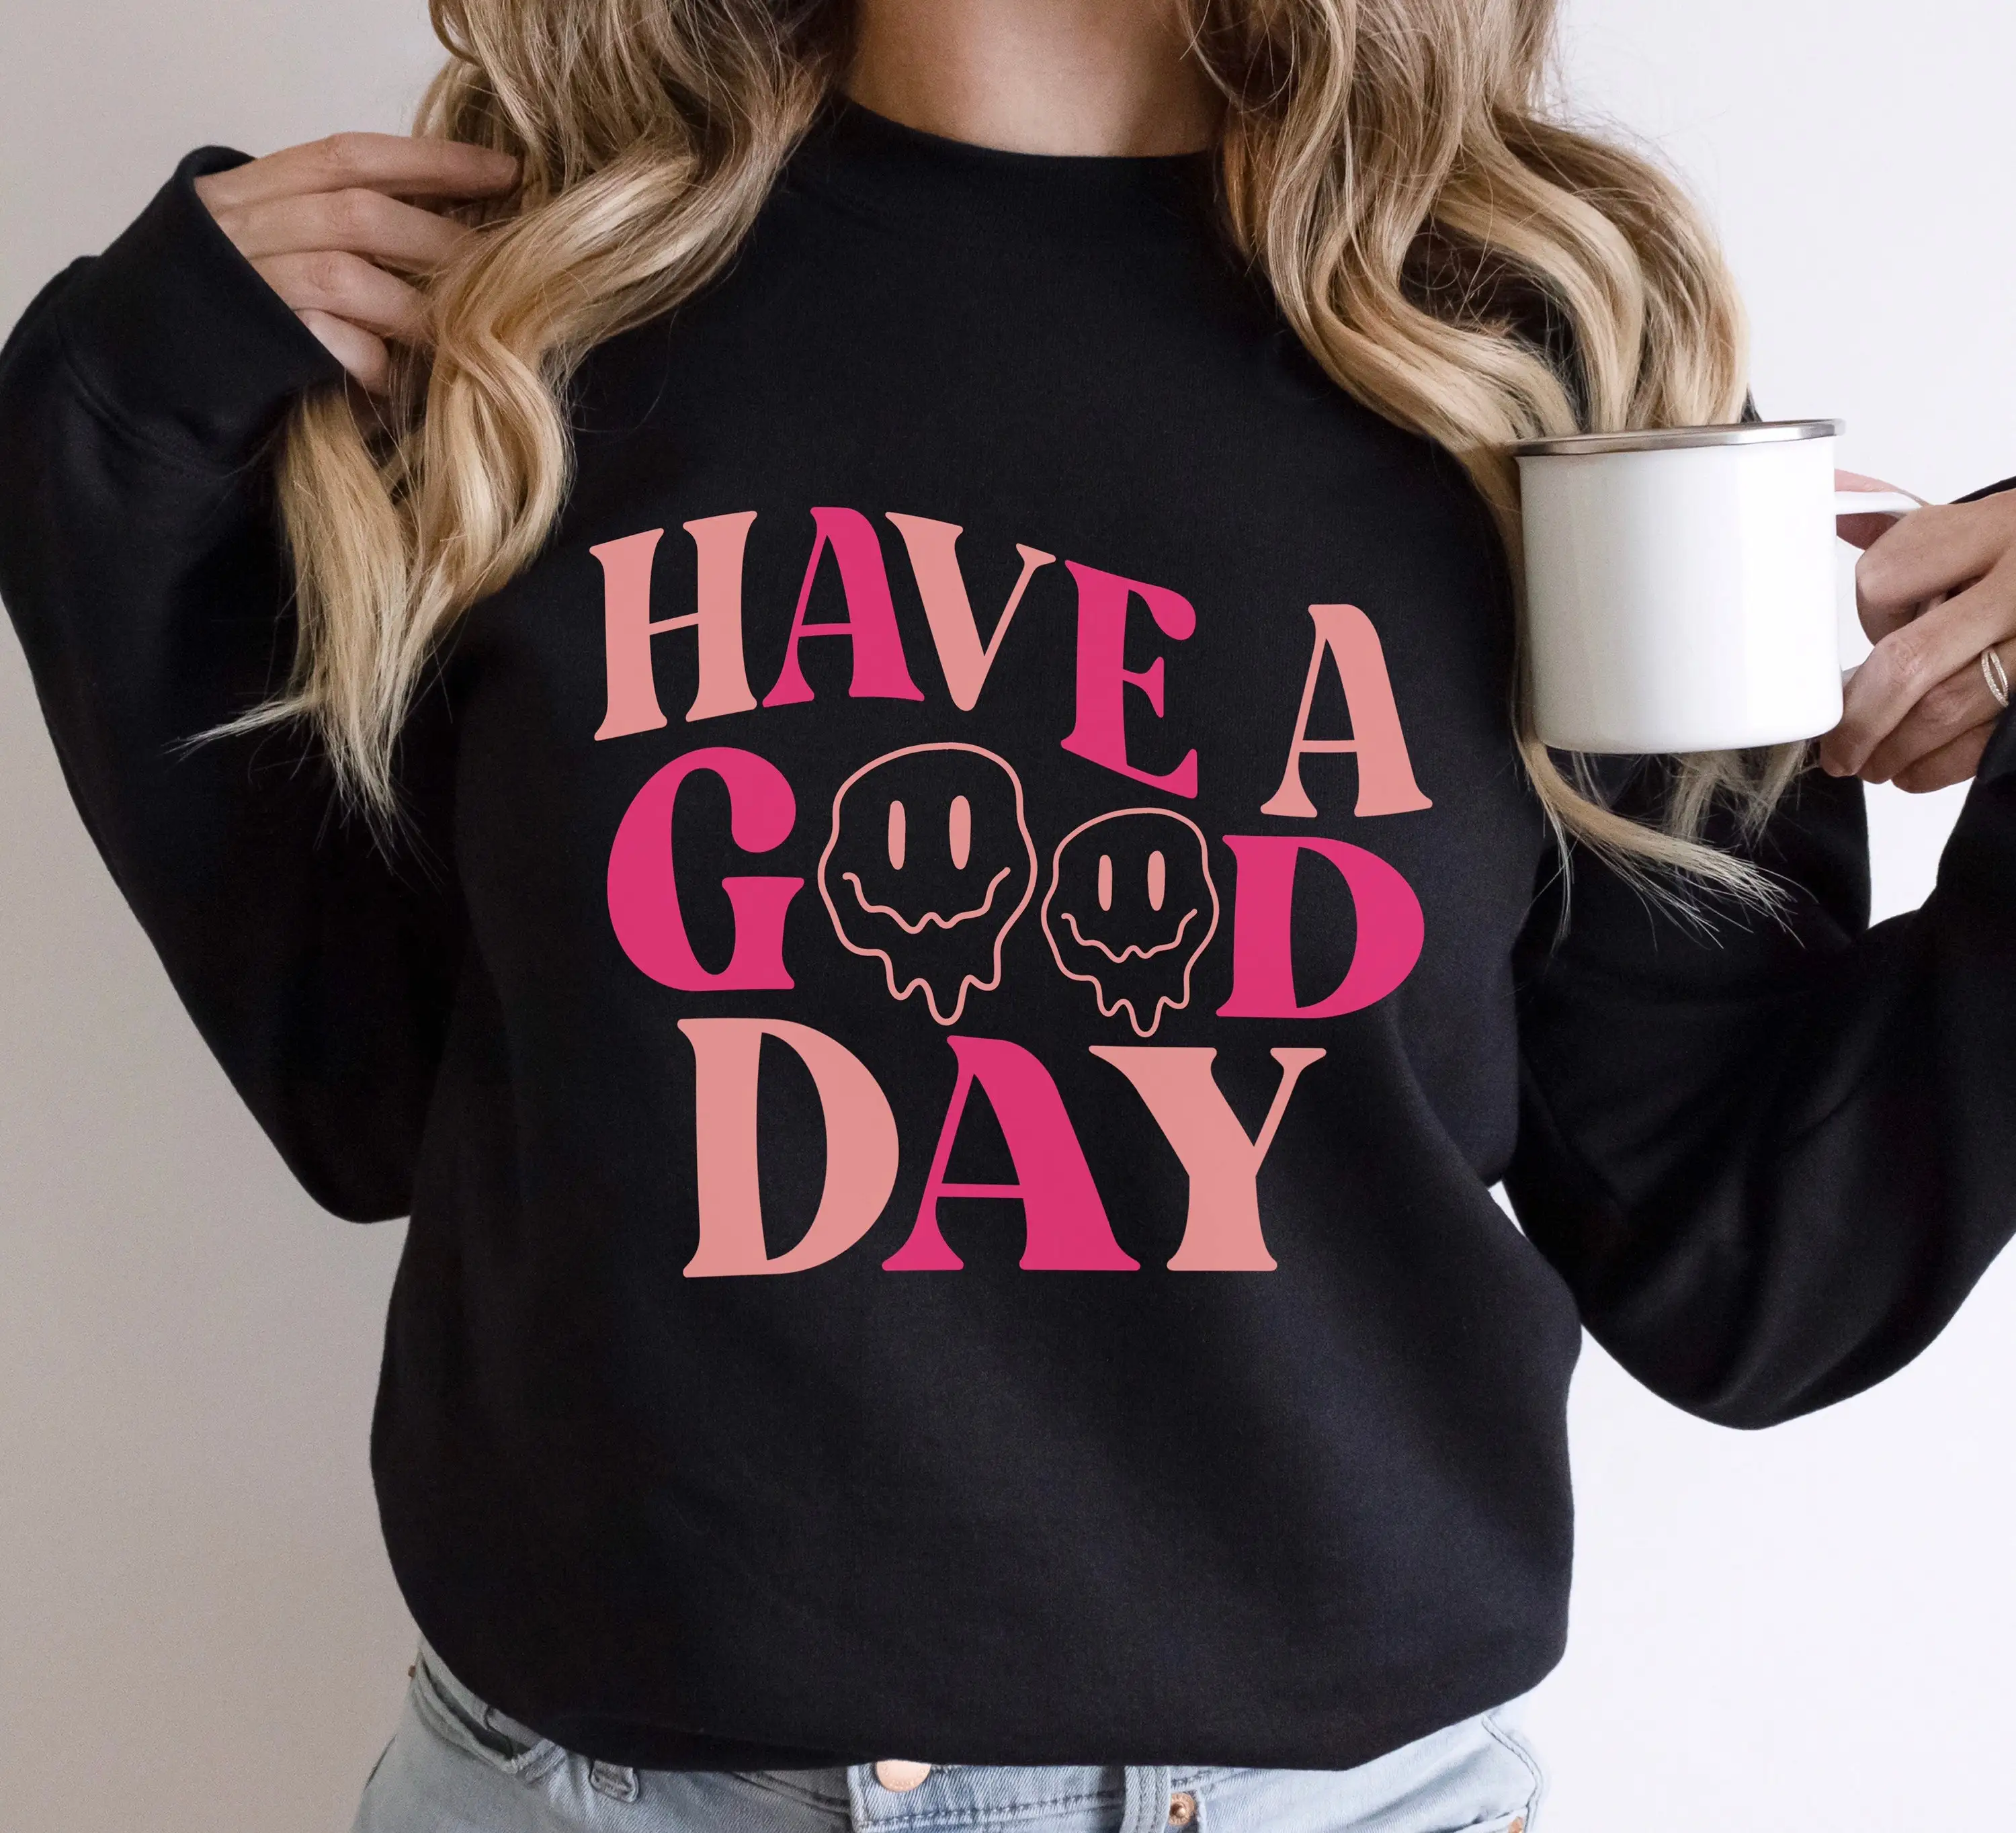 

Have a Good Day Sweatshirt Retro Smiley Face funny graphic cute women fashion youngs grunge tumblr hipster pullovers gift tops